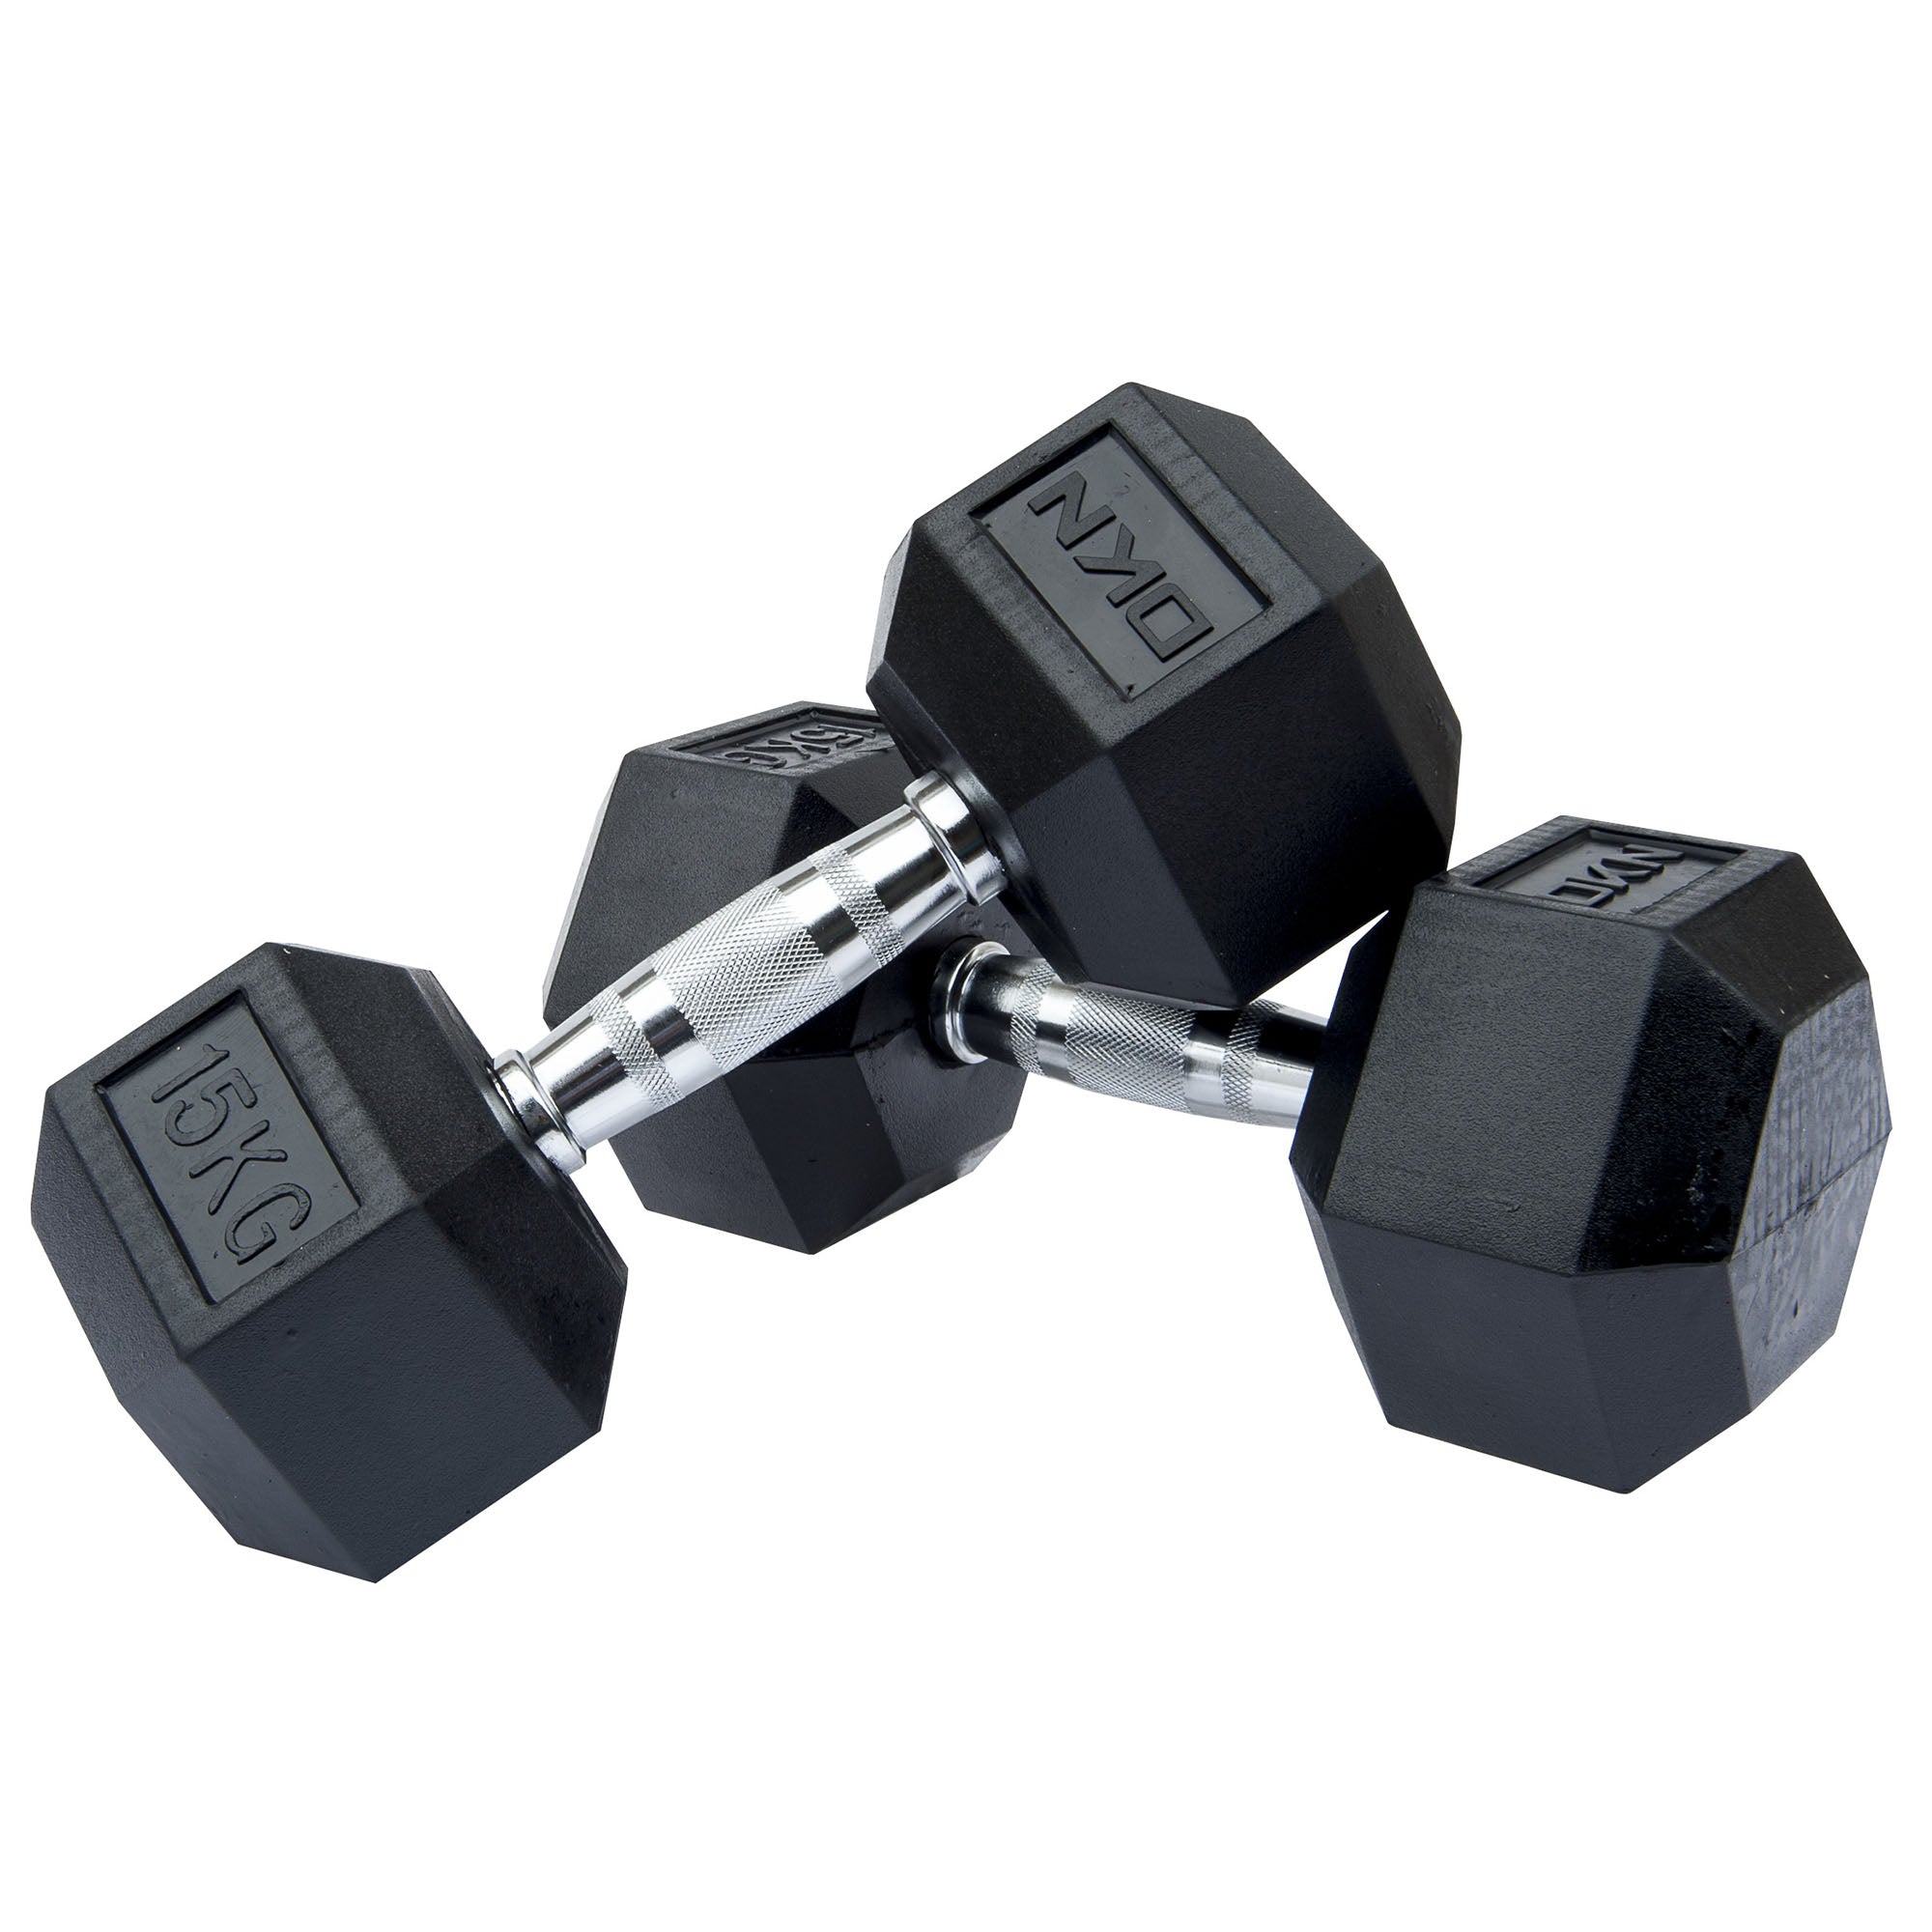 Image of DKN Rubber Hex Dumbbells